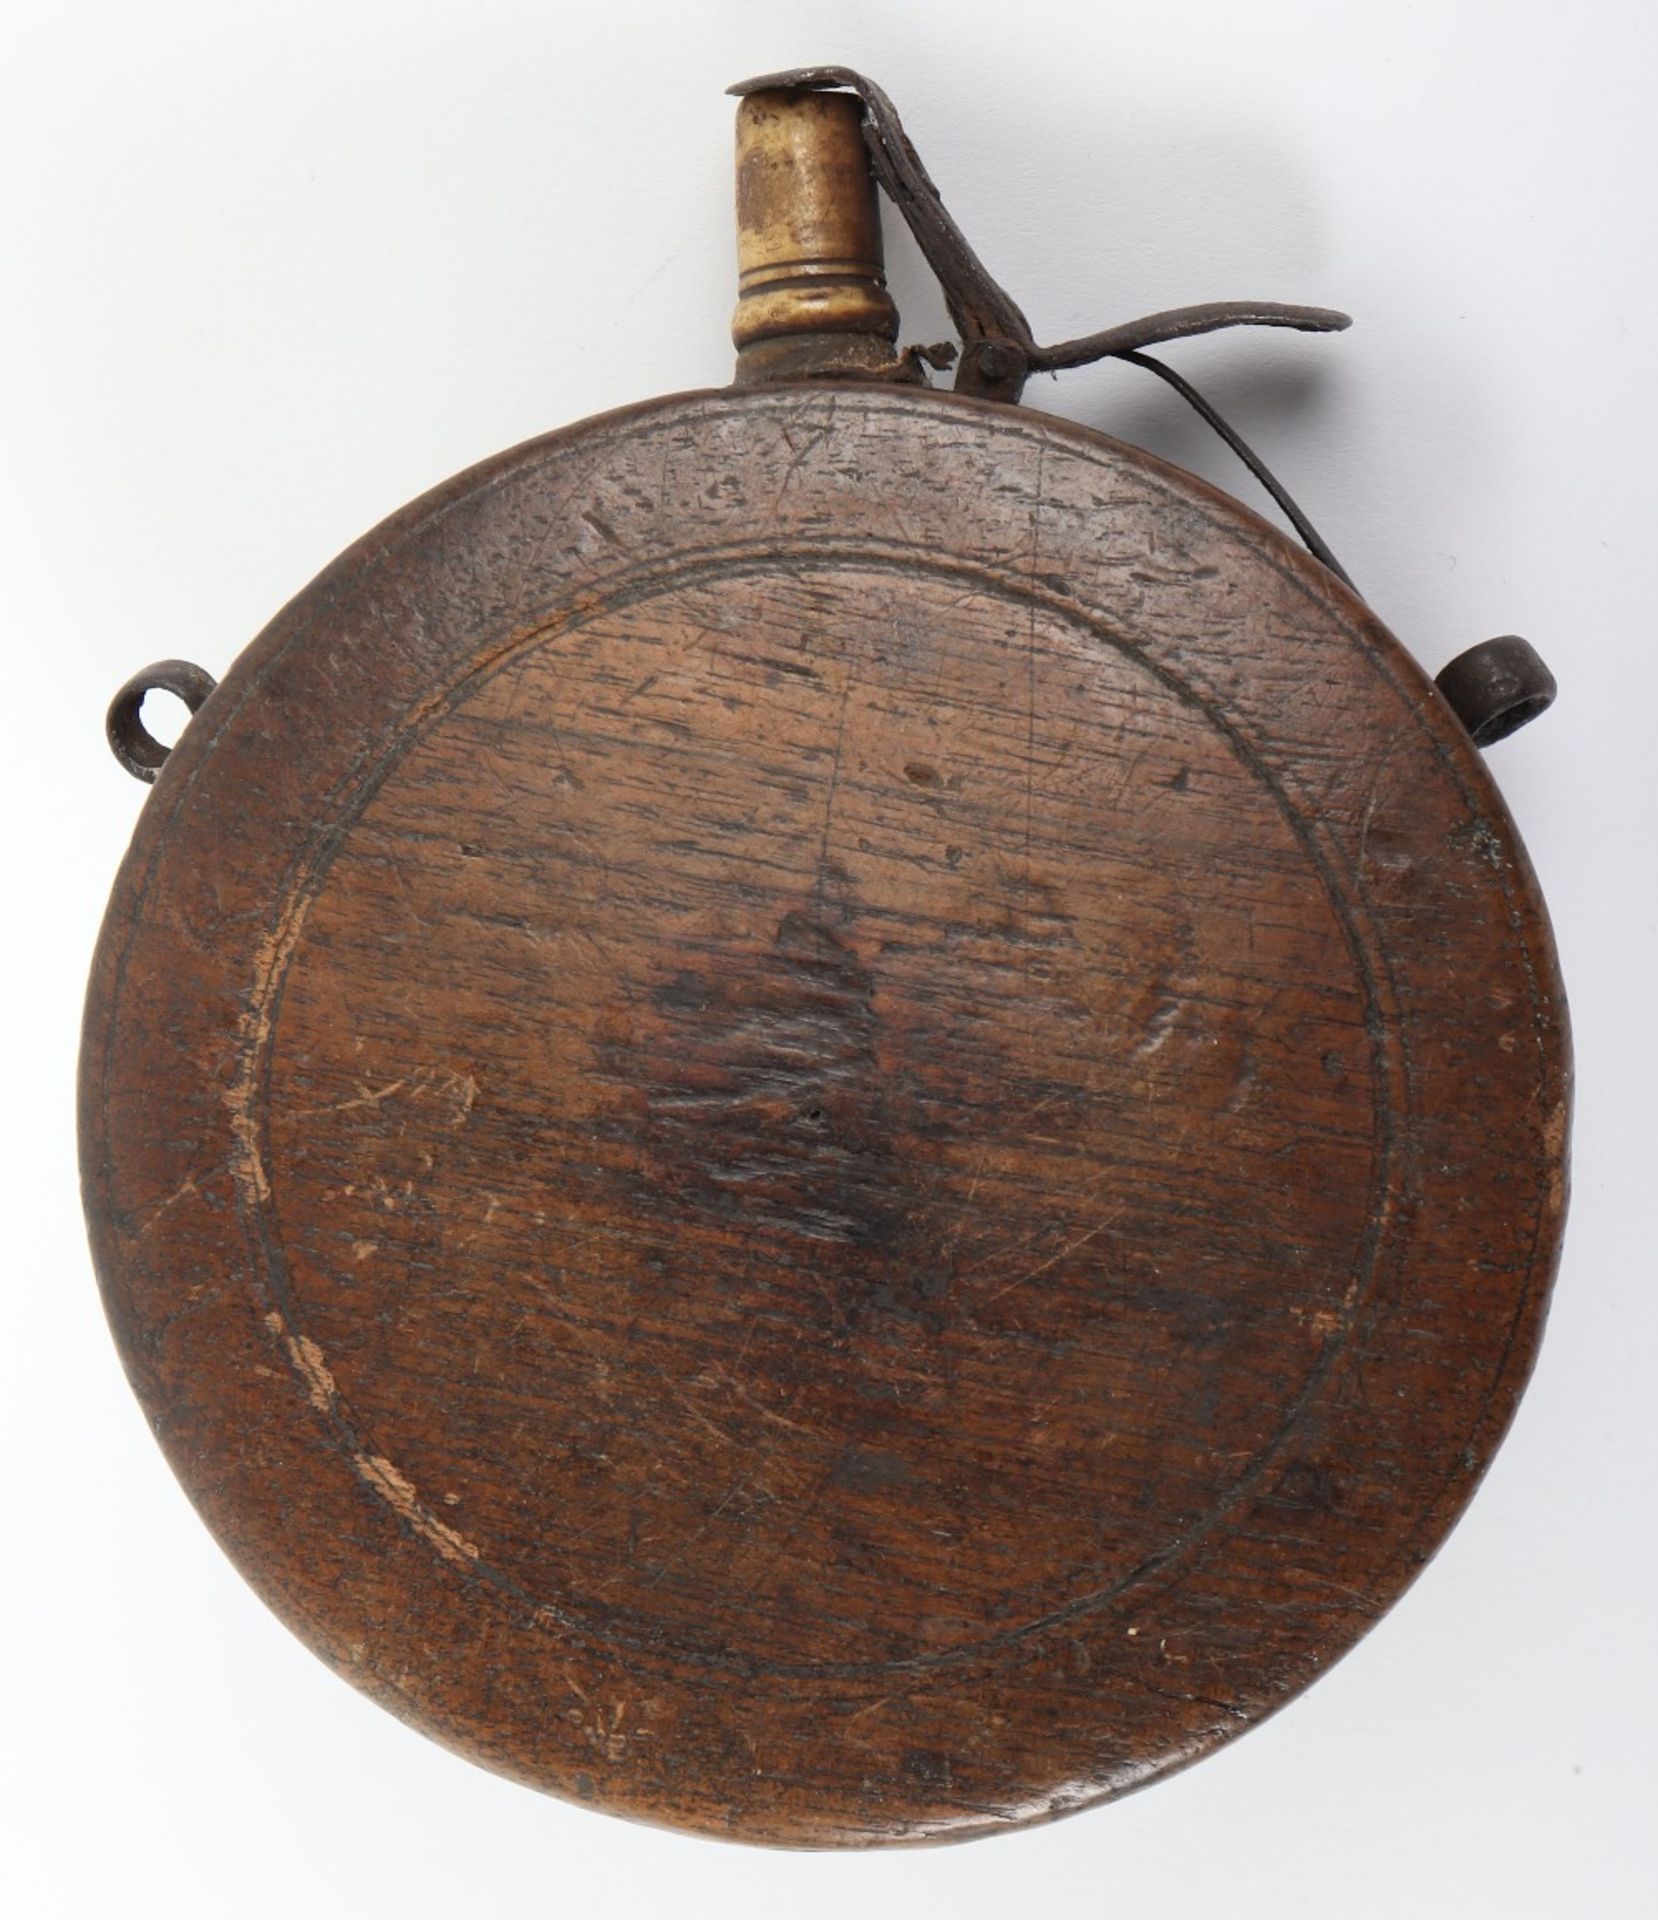 Circular Carved Wooden Powder Flask, European 17th Century - Image 4 of 7